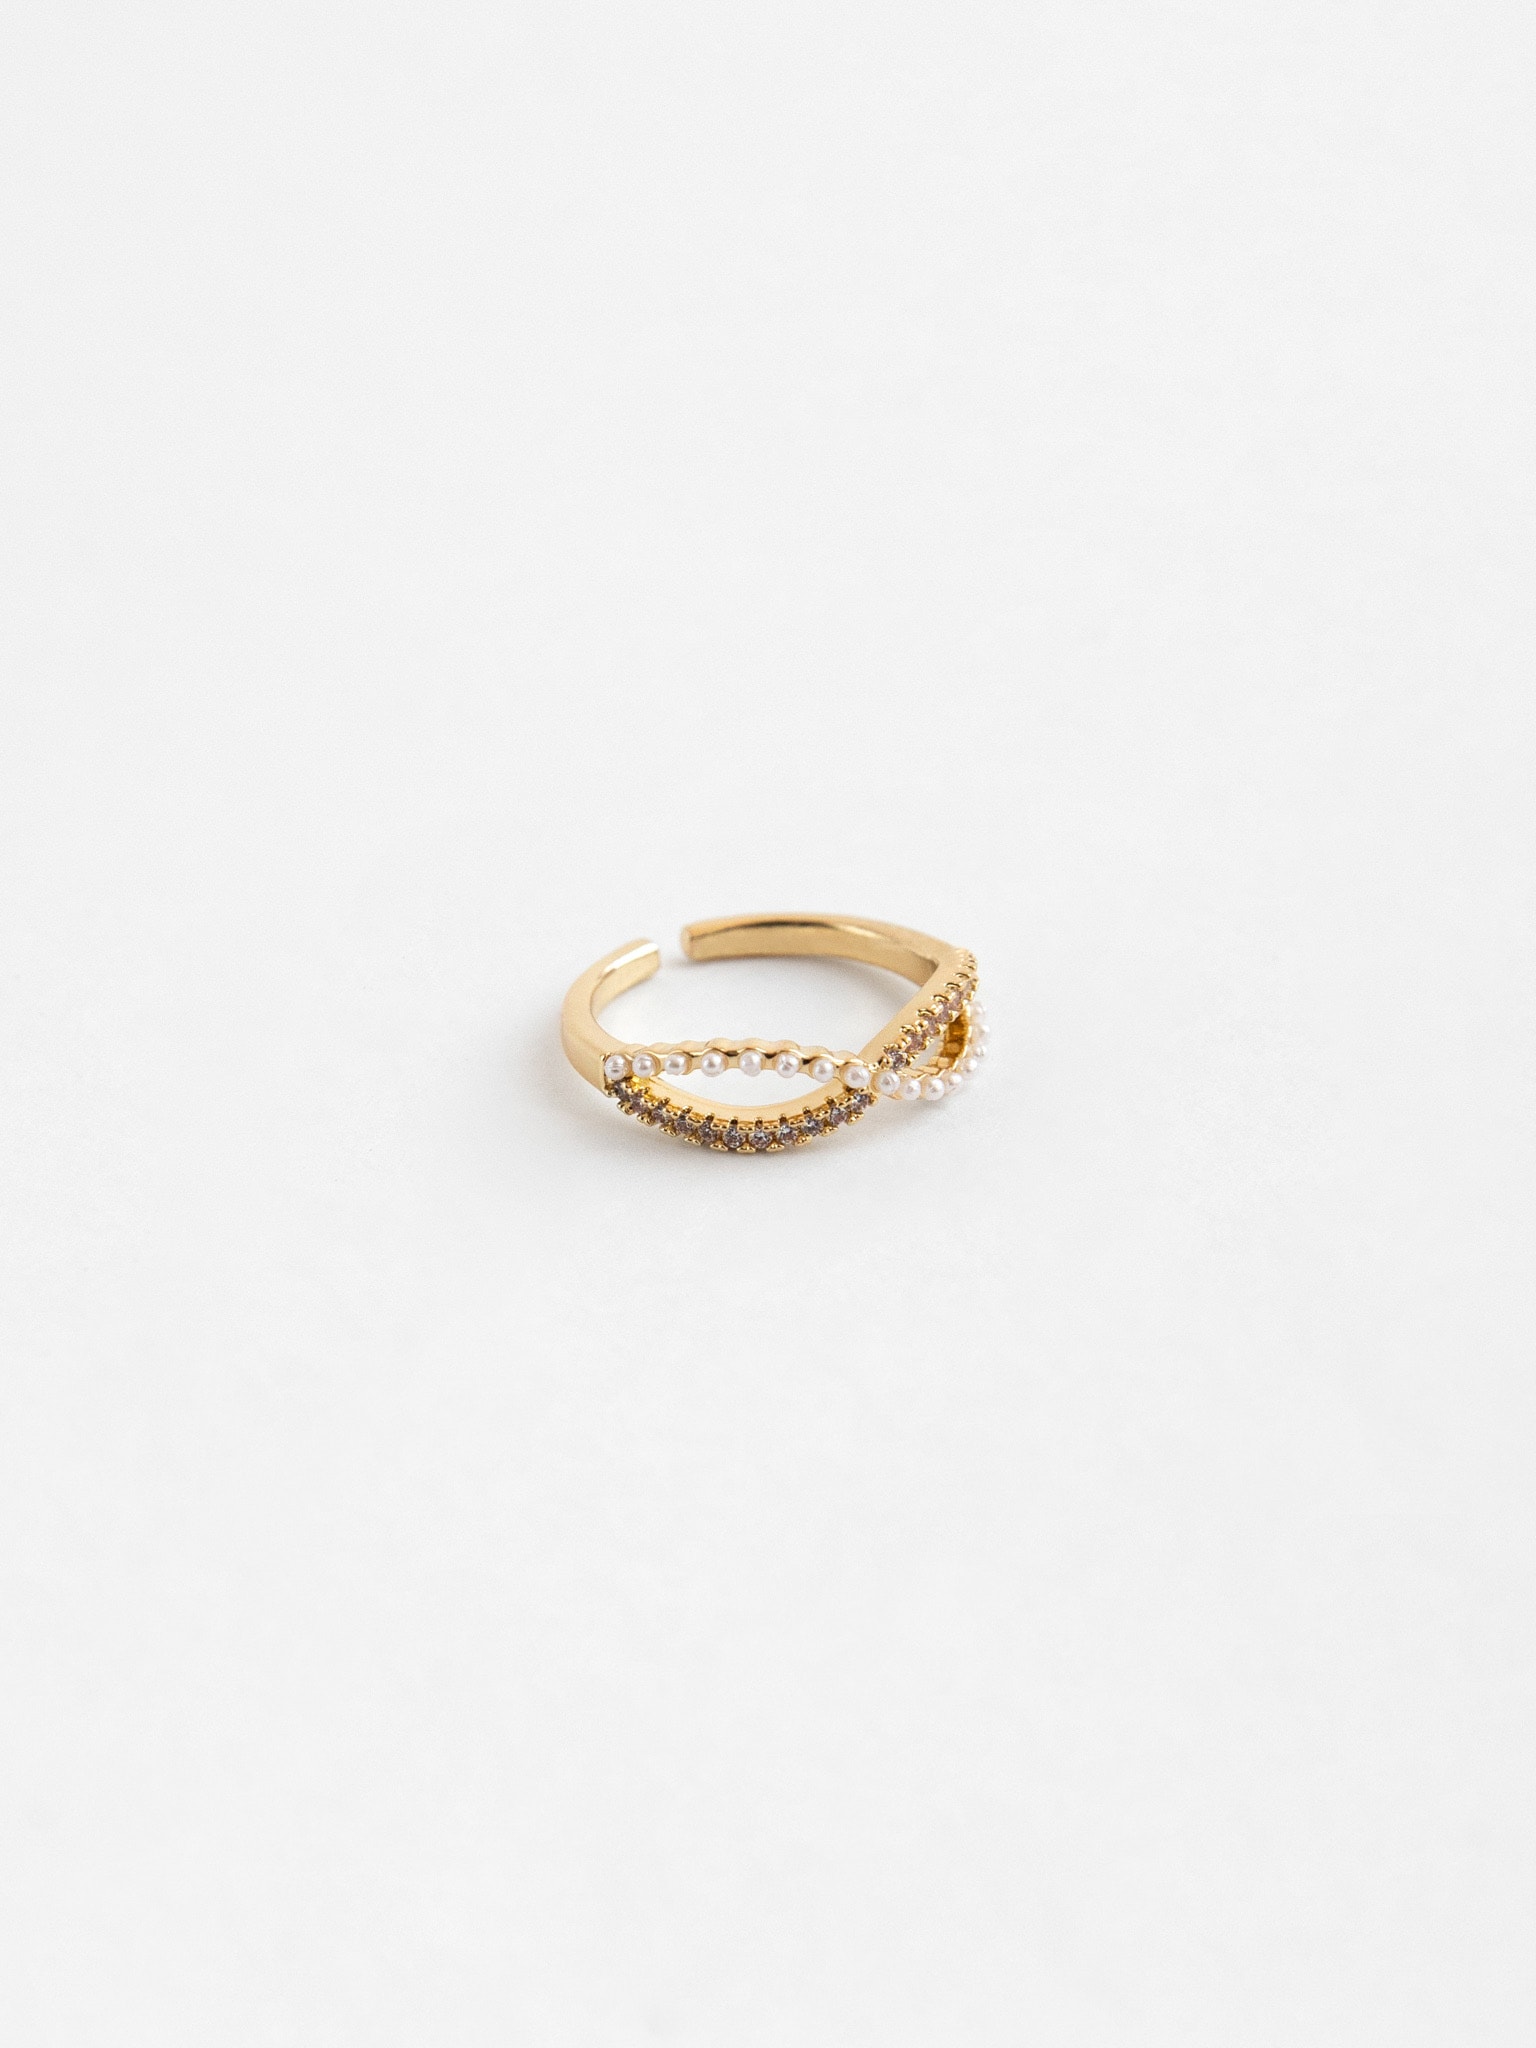 Criss-crossing encrusted ring